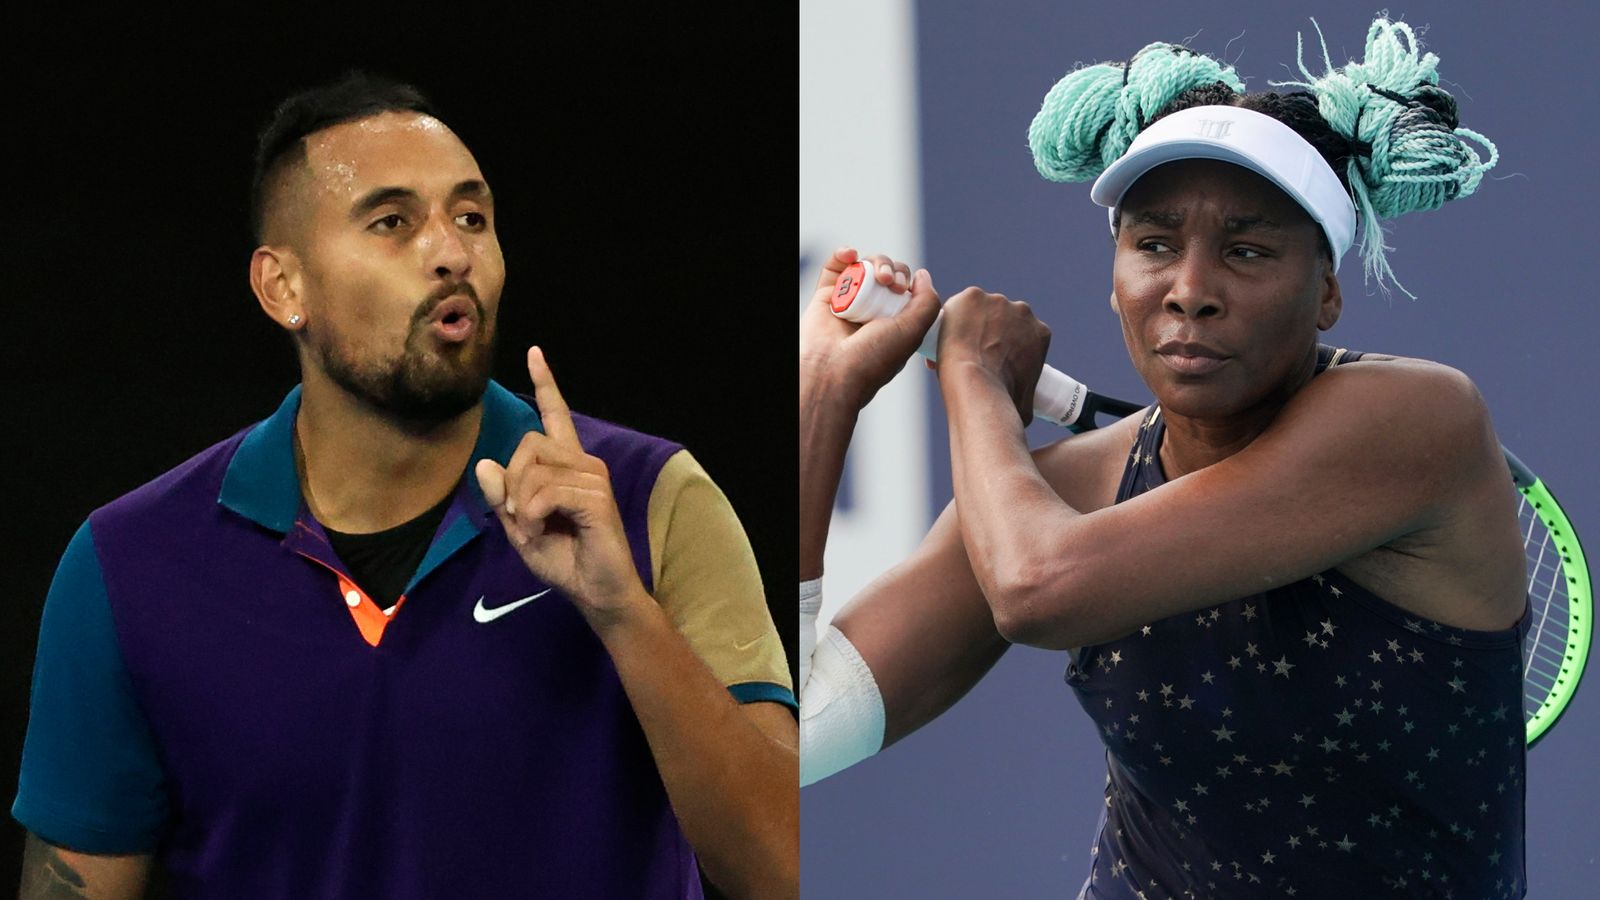 Wimbledon 2021: Nick Kyrgios and Venus Williams team up for mixed doubles at All England Club ...